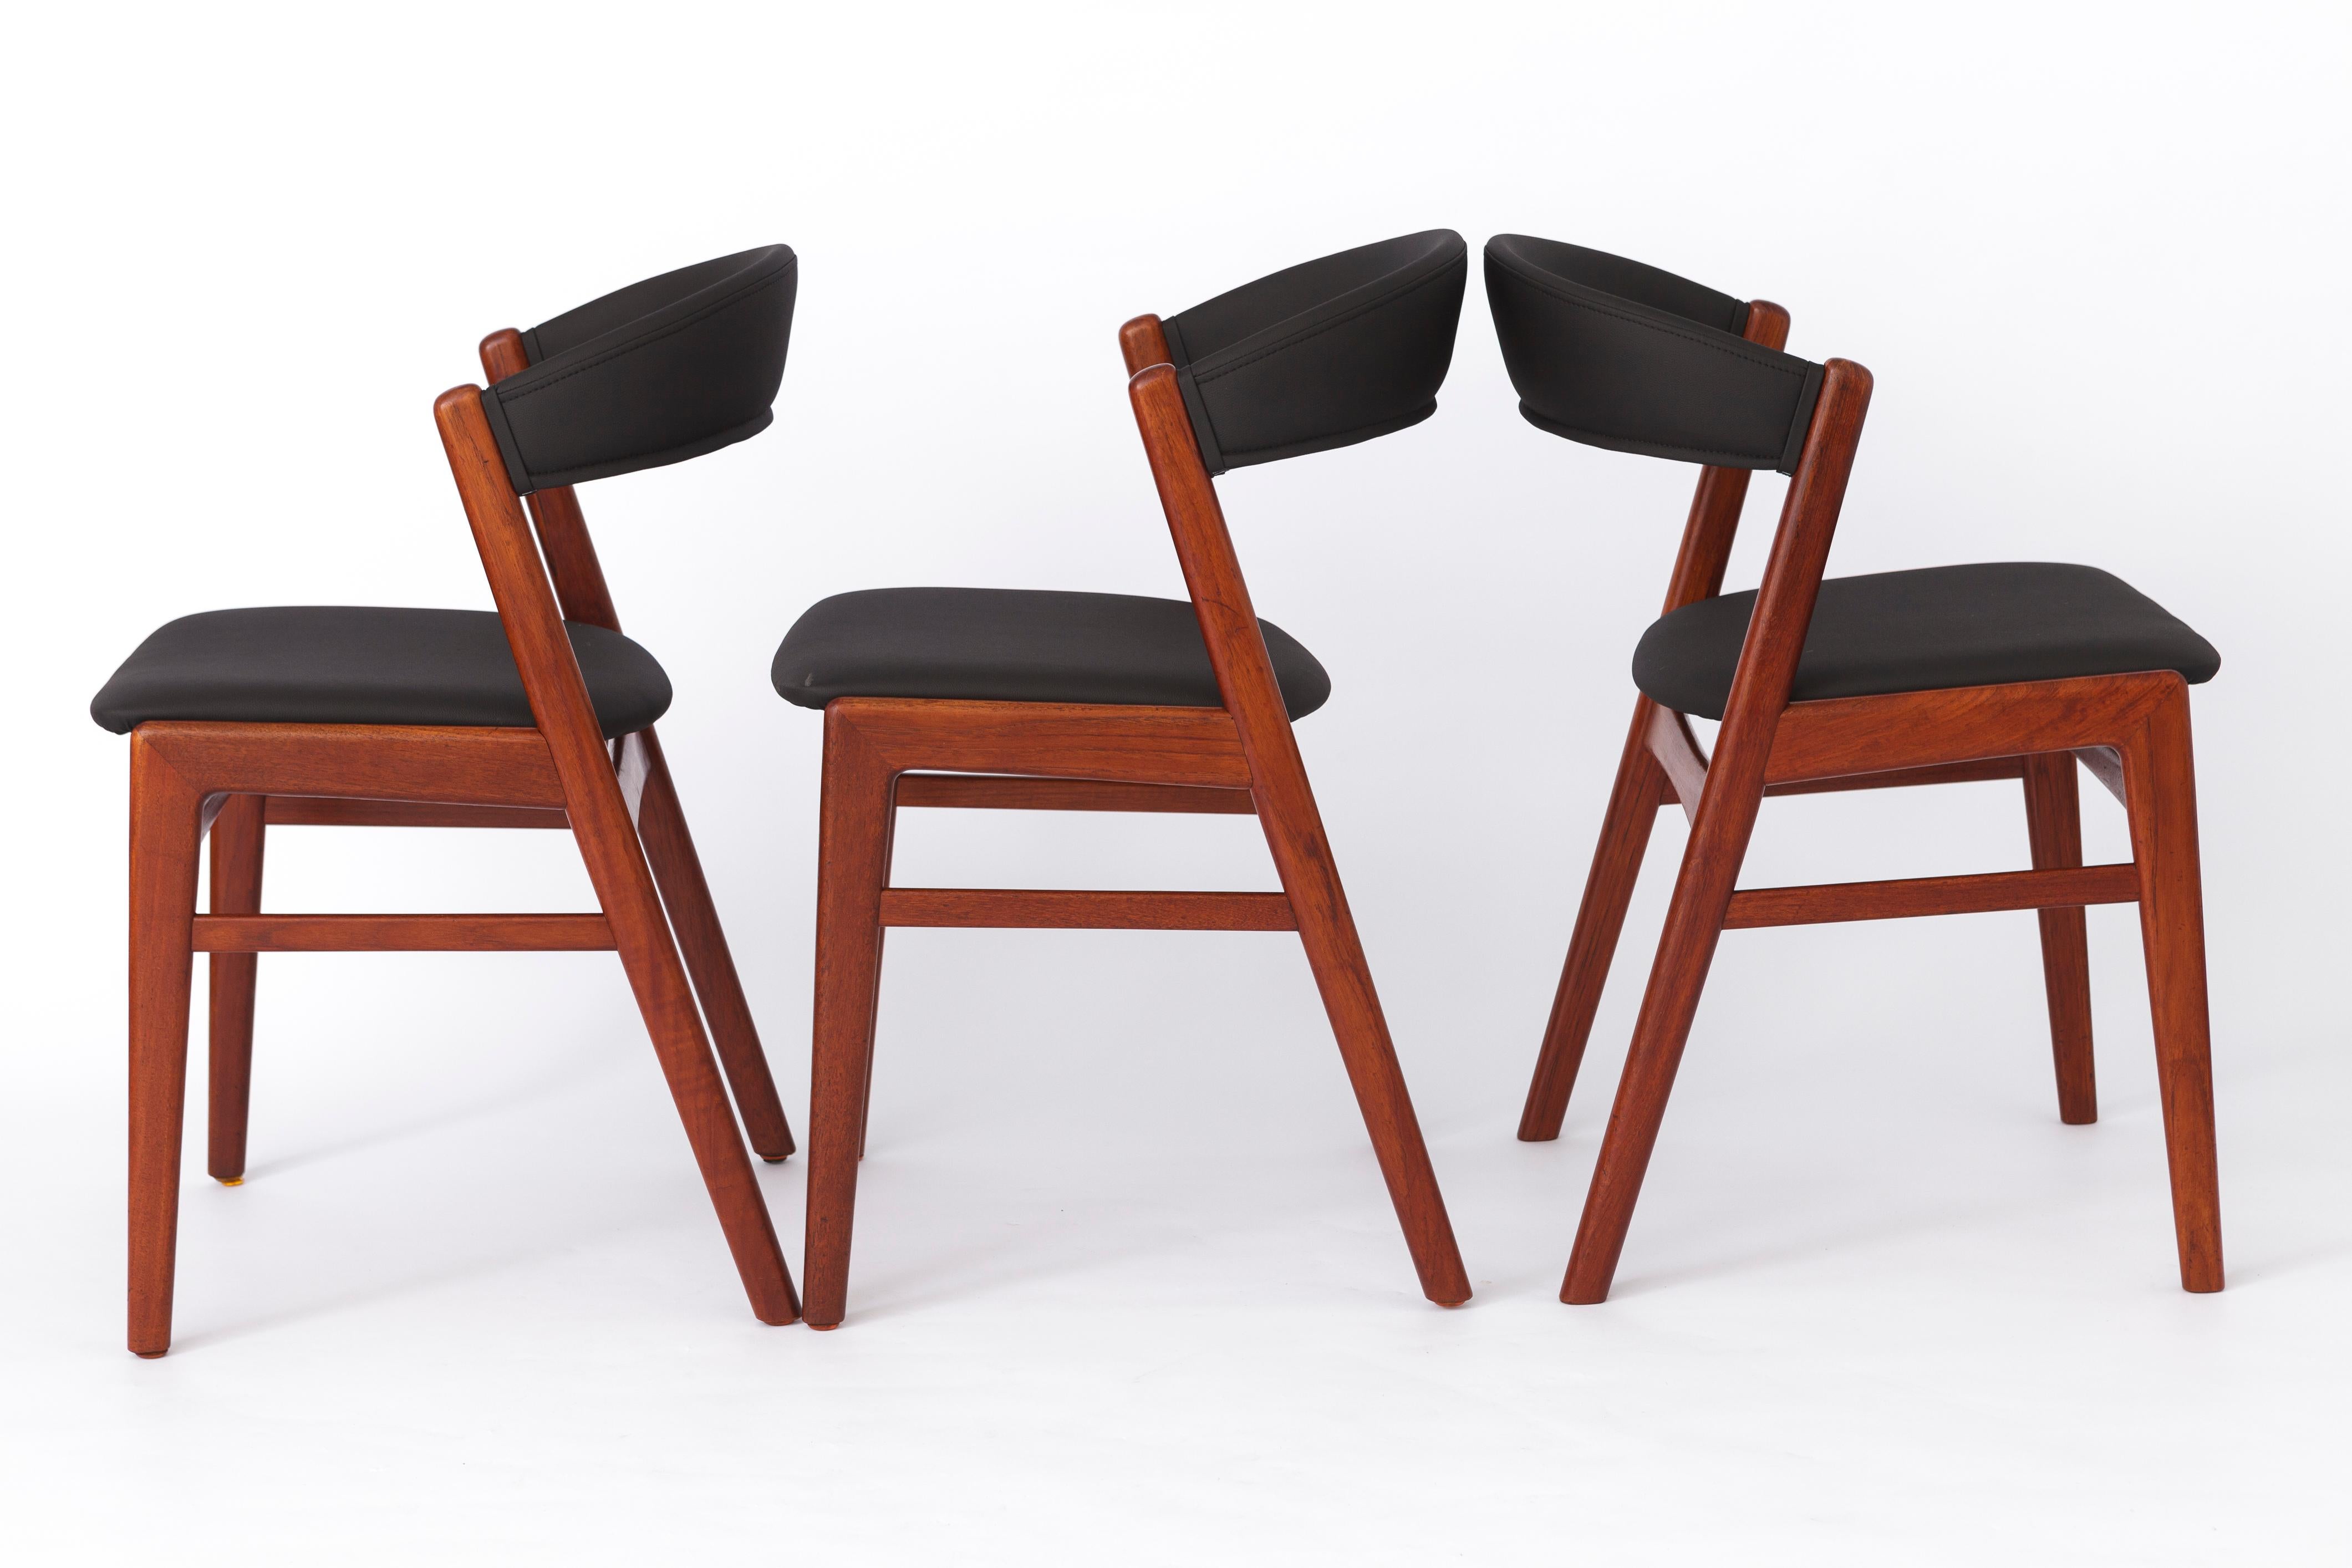 Polished 6 Vintage Chairs DUX - Ribbon Back 1960s, Sweden - Dining chairs, Teak, Set of 6 For Sale